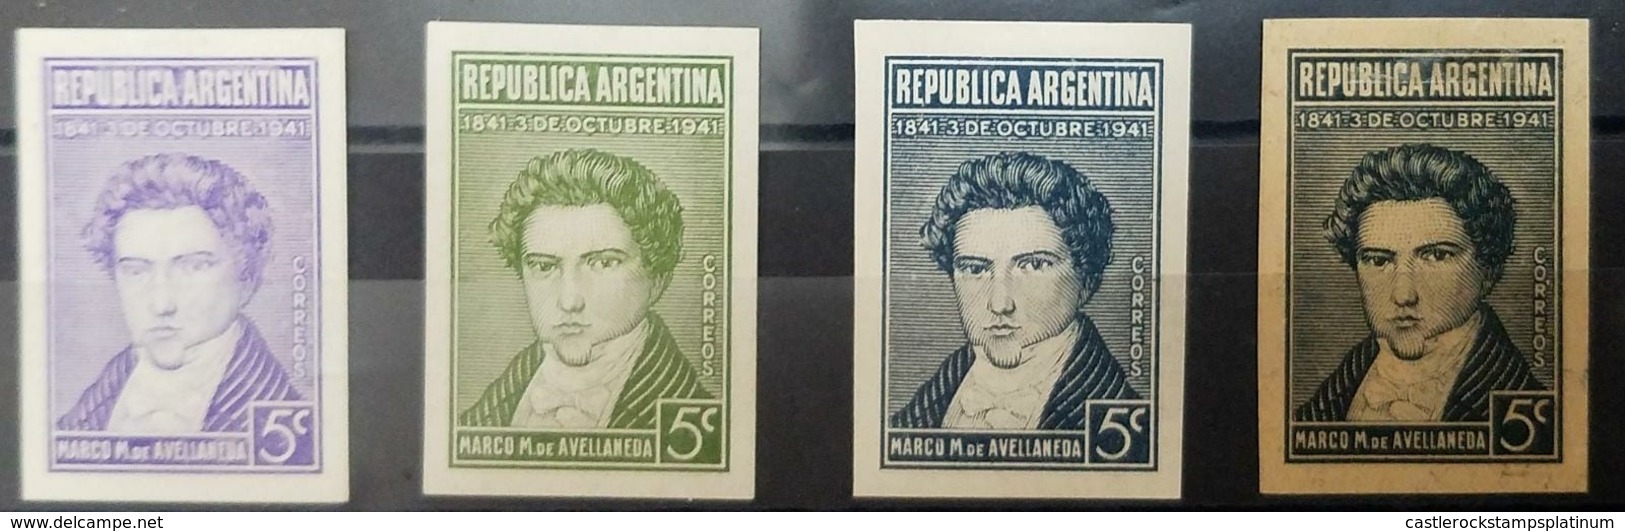 O) 1941 ARGENTINA. PROOF, MARCO M. DE AVELLANEDA -ARMY LEADER AND MARTYR SCT 476 5c, SET MNH - Unused Stamps